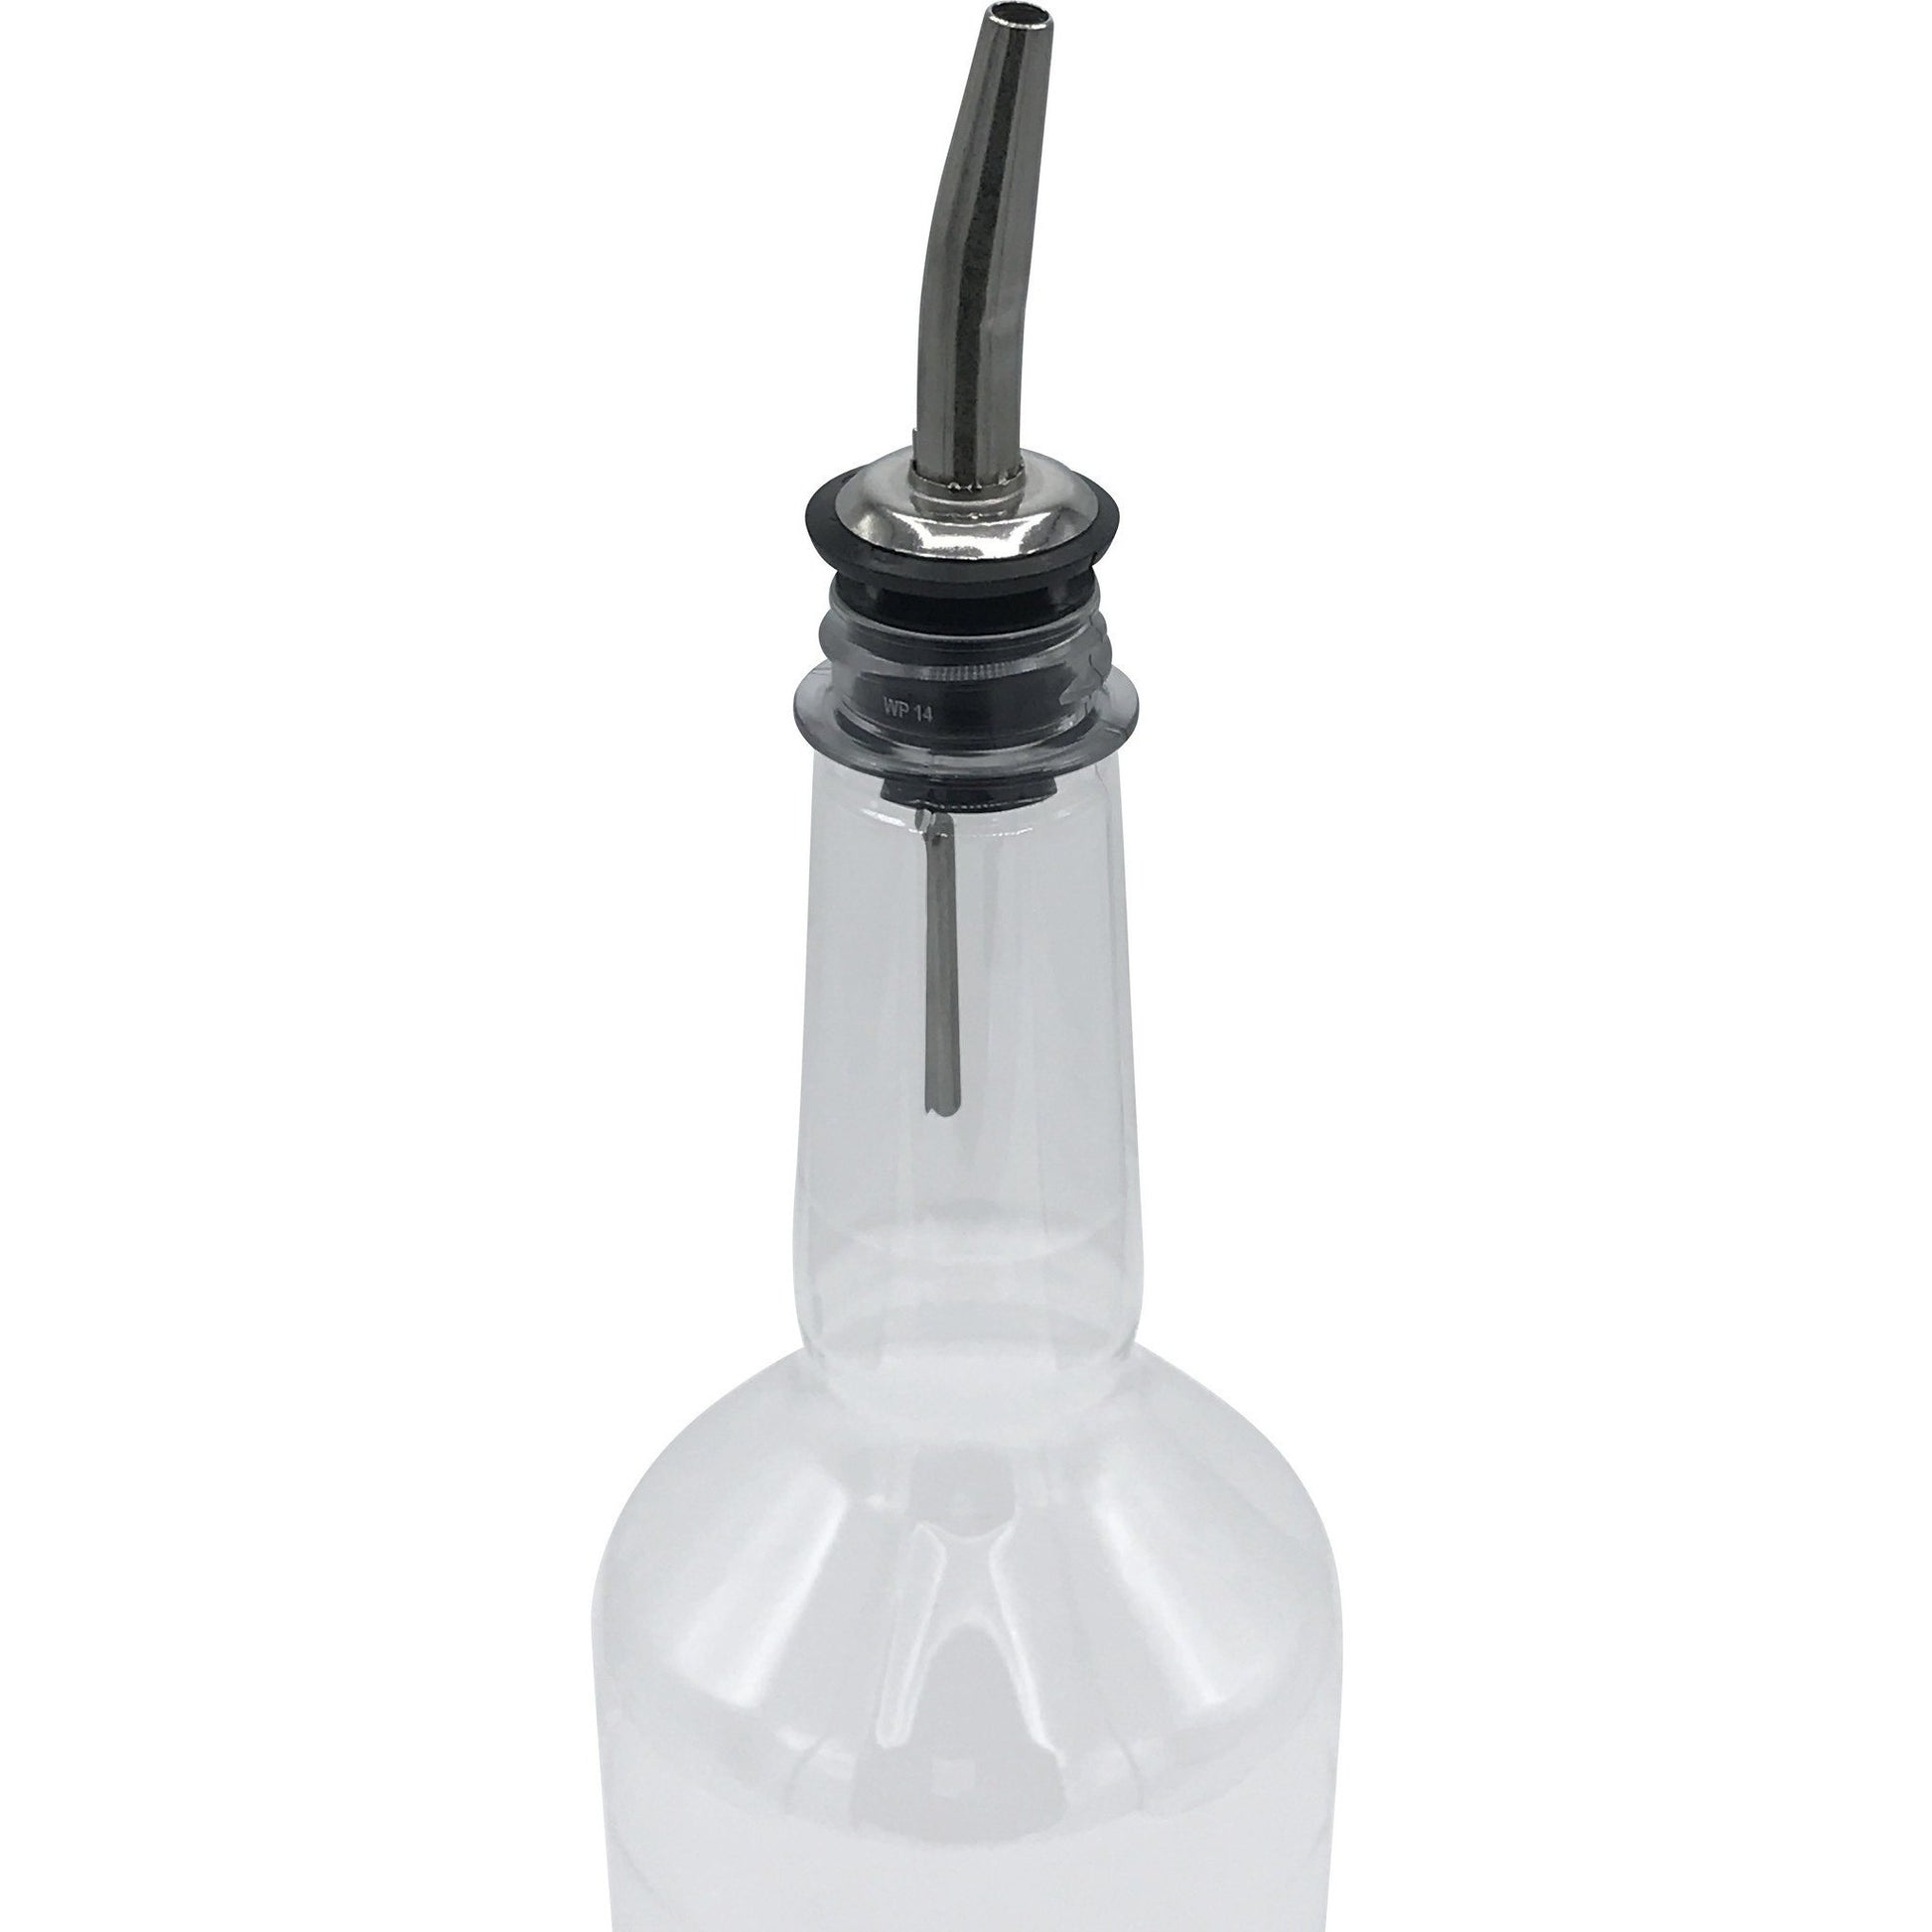 Stainless Steel Pouring Bottle Spout - IcySkyy